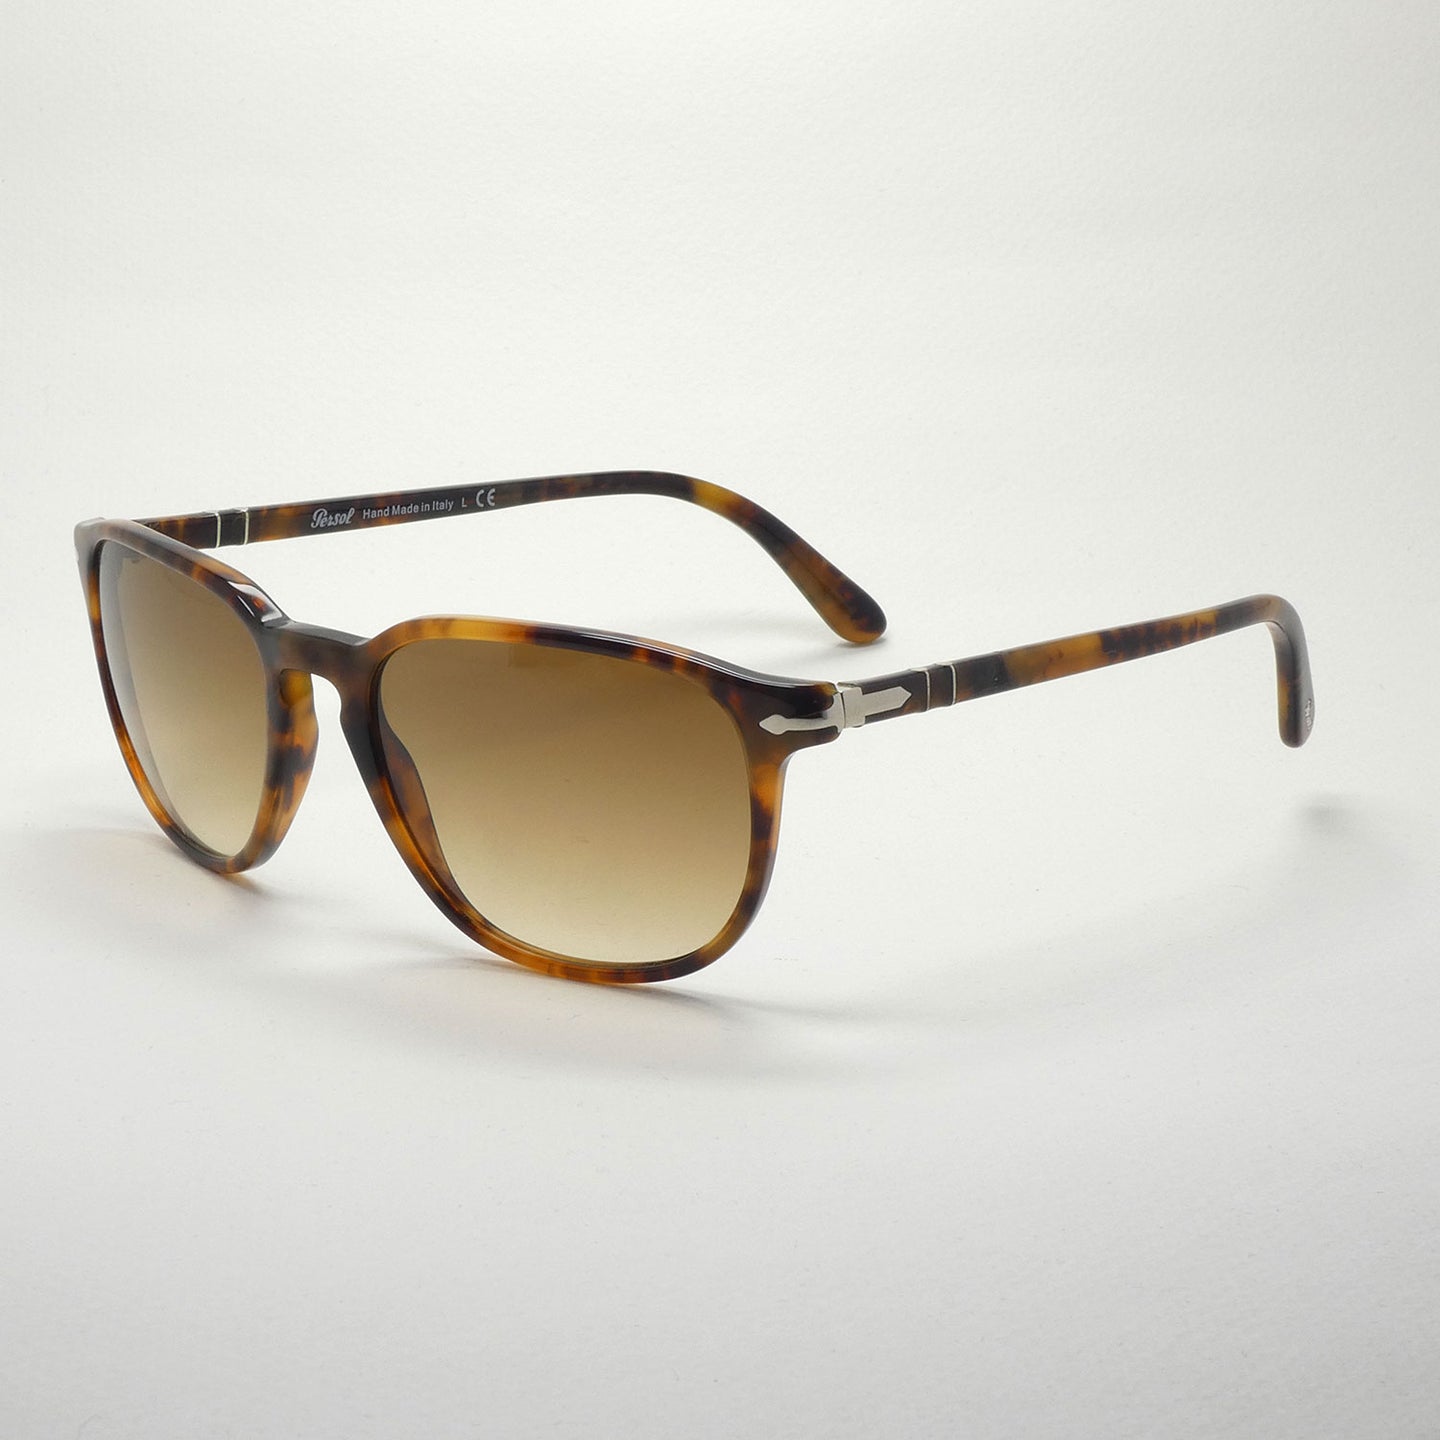 glasses persol 3019 108/51 size 55 angled view